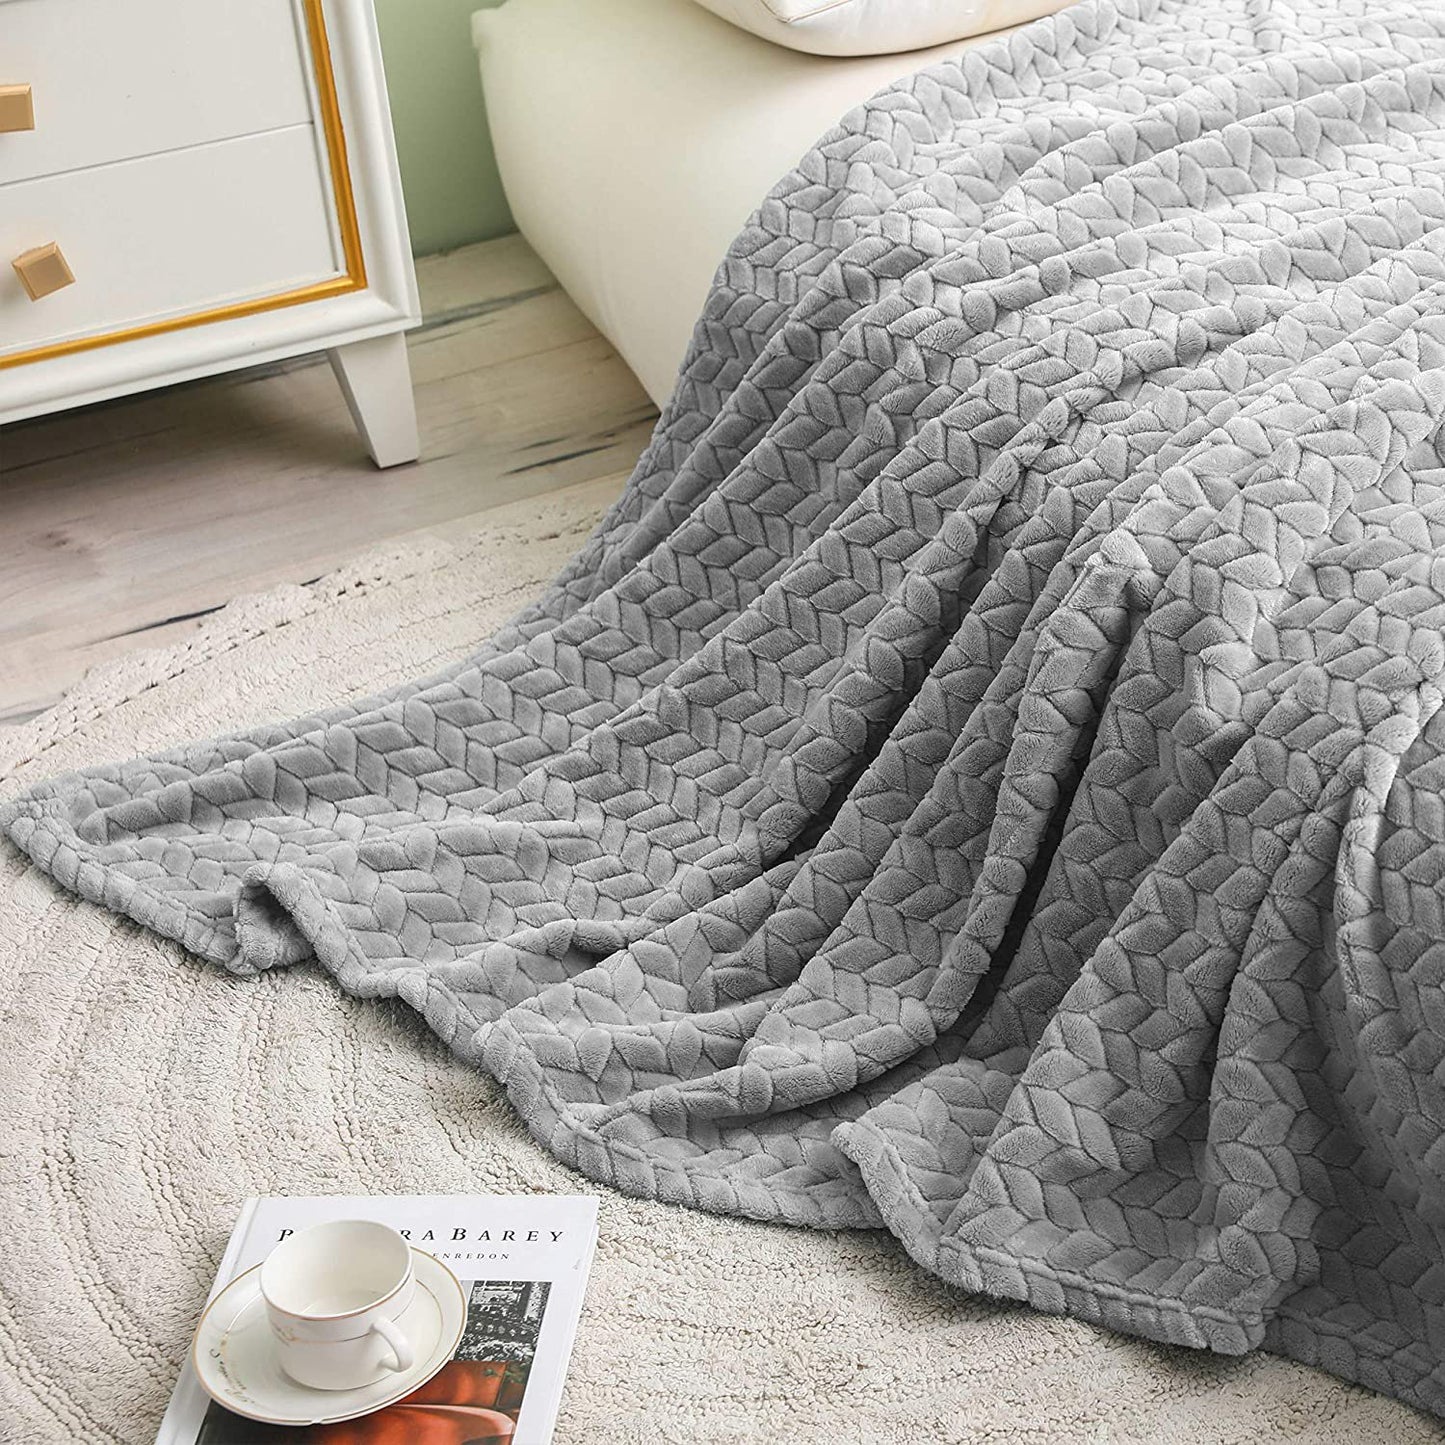 Exclusivo Mezcla Large Flannel Fleece Throw Blanket, Jacquard Weave Leaves Pattern (50" x 70", Light Gray) - Soft, Warm, Lightweight and Decorative